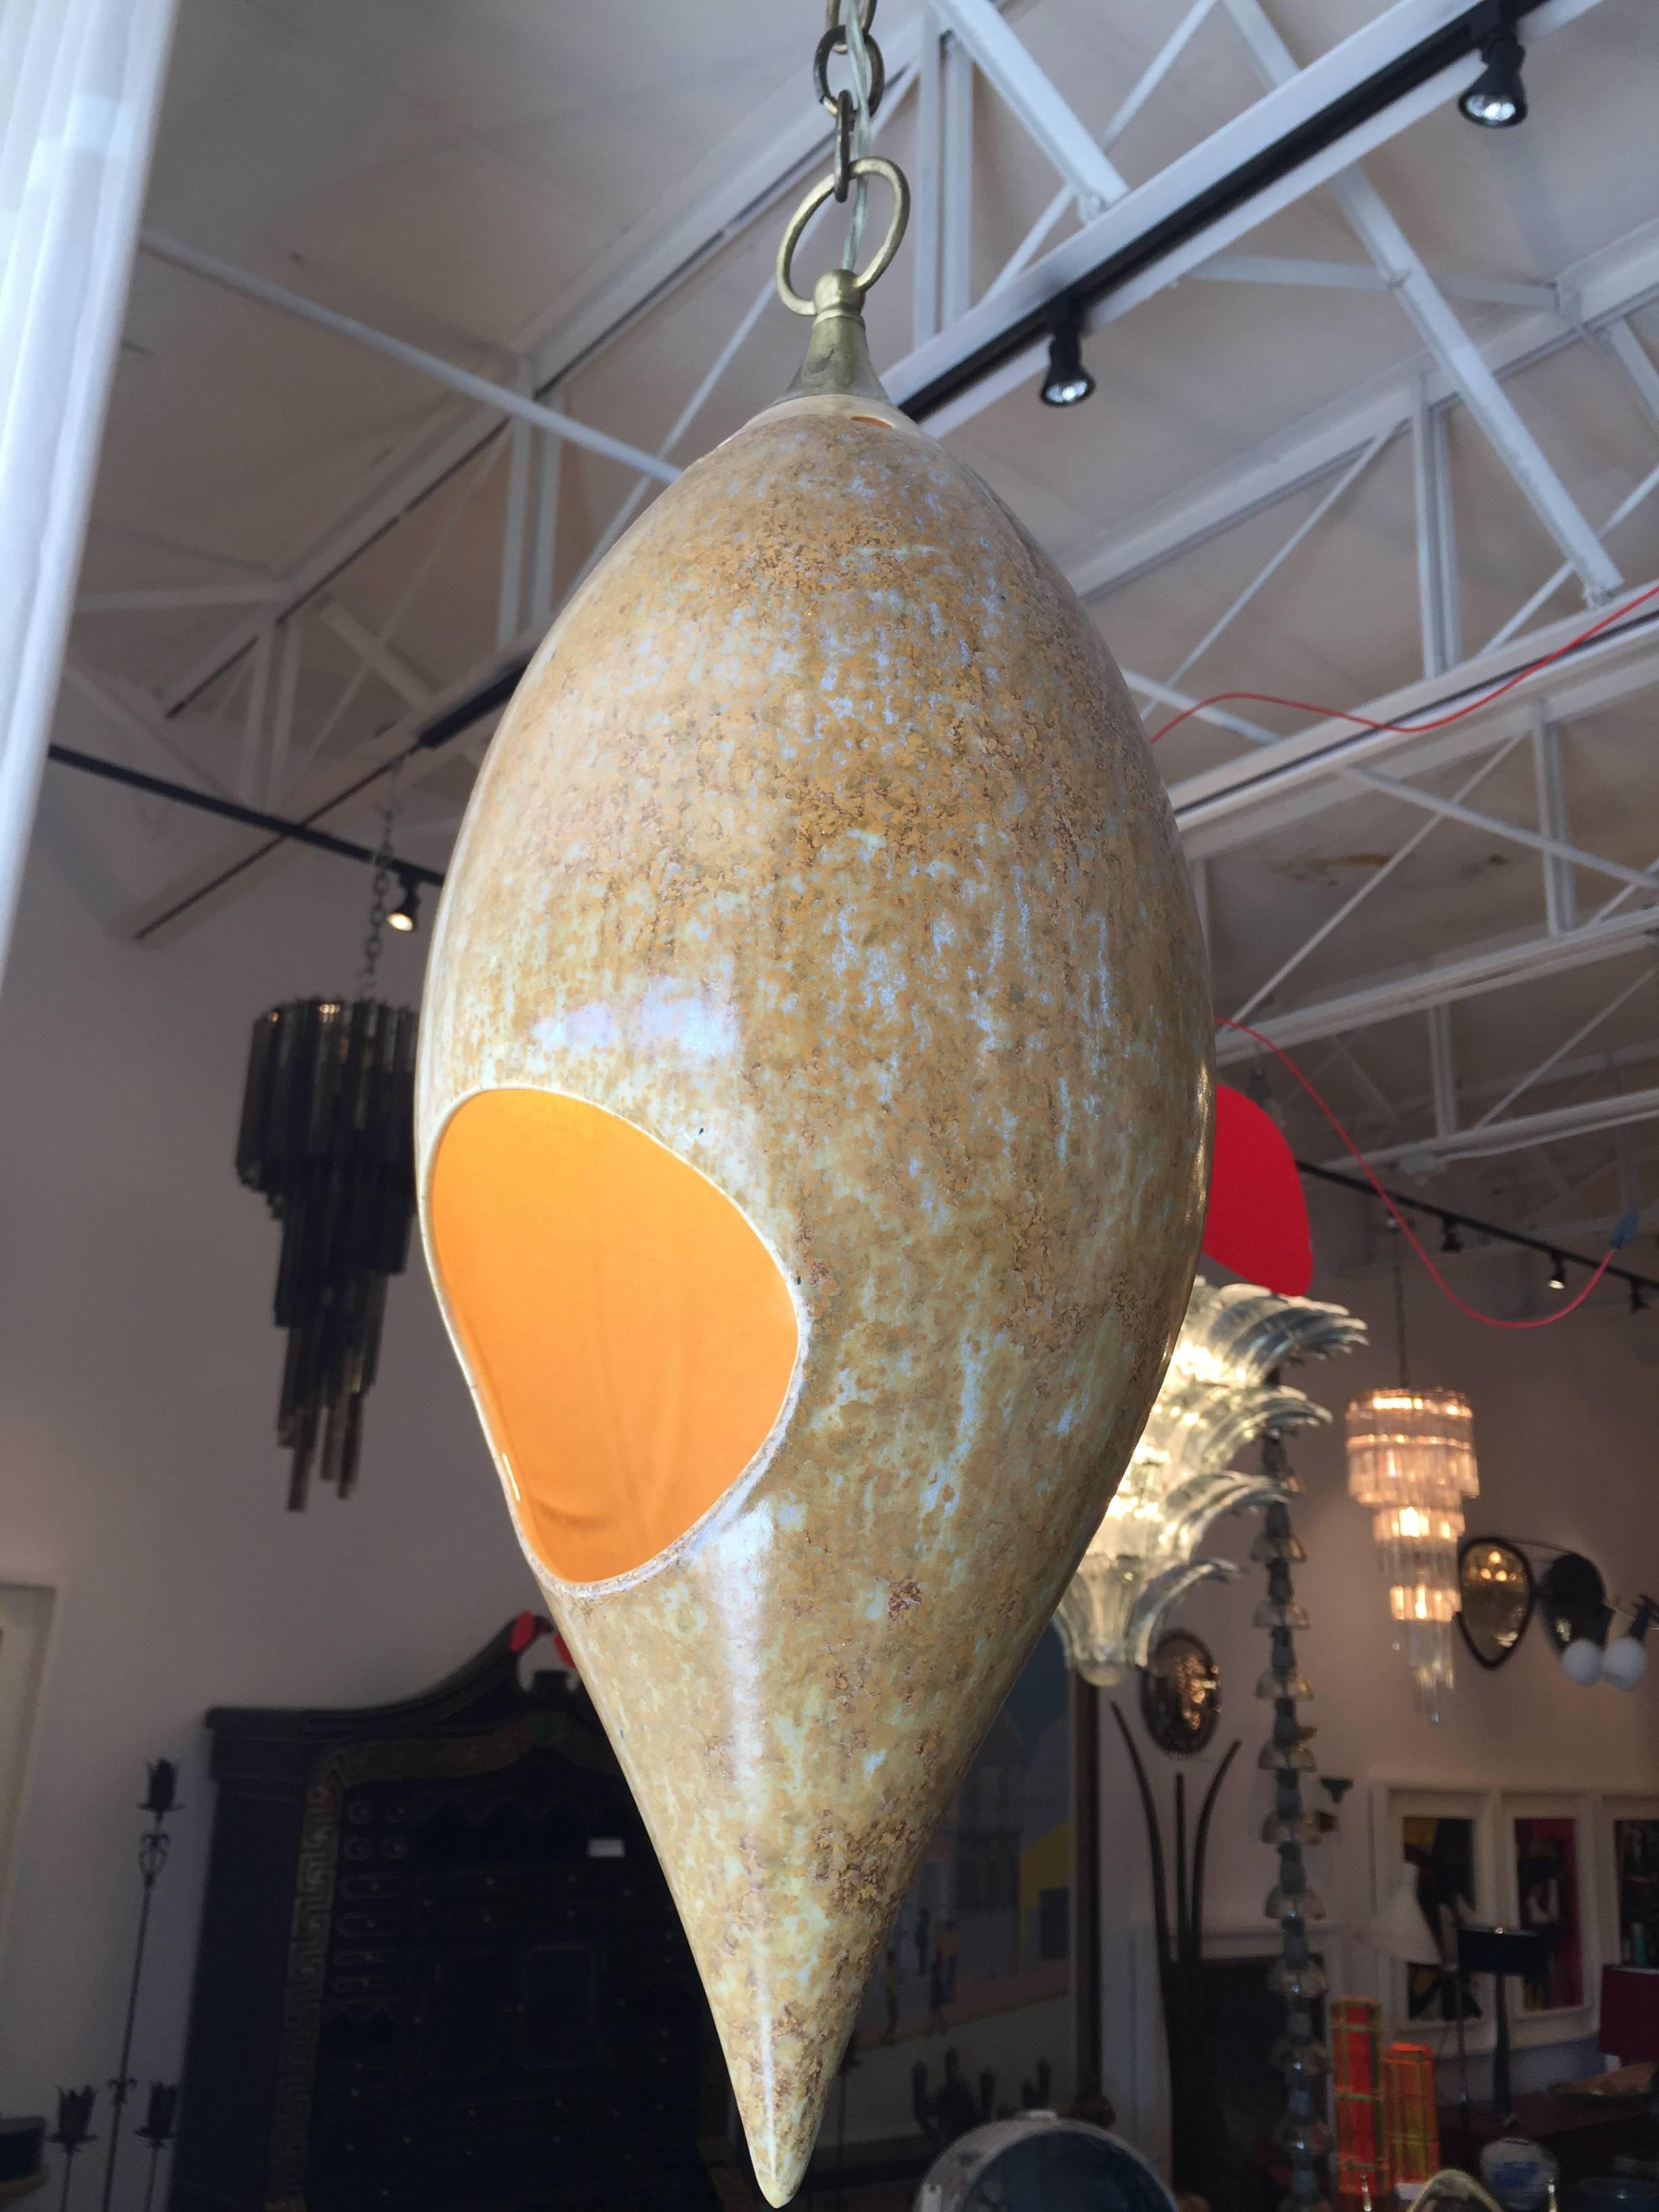 This midcentury ceramic hanging light features two round openings for light diffusion and bulb access. Wonderful natural sand coloring and on a long chain for any height ceiling.